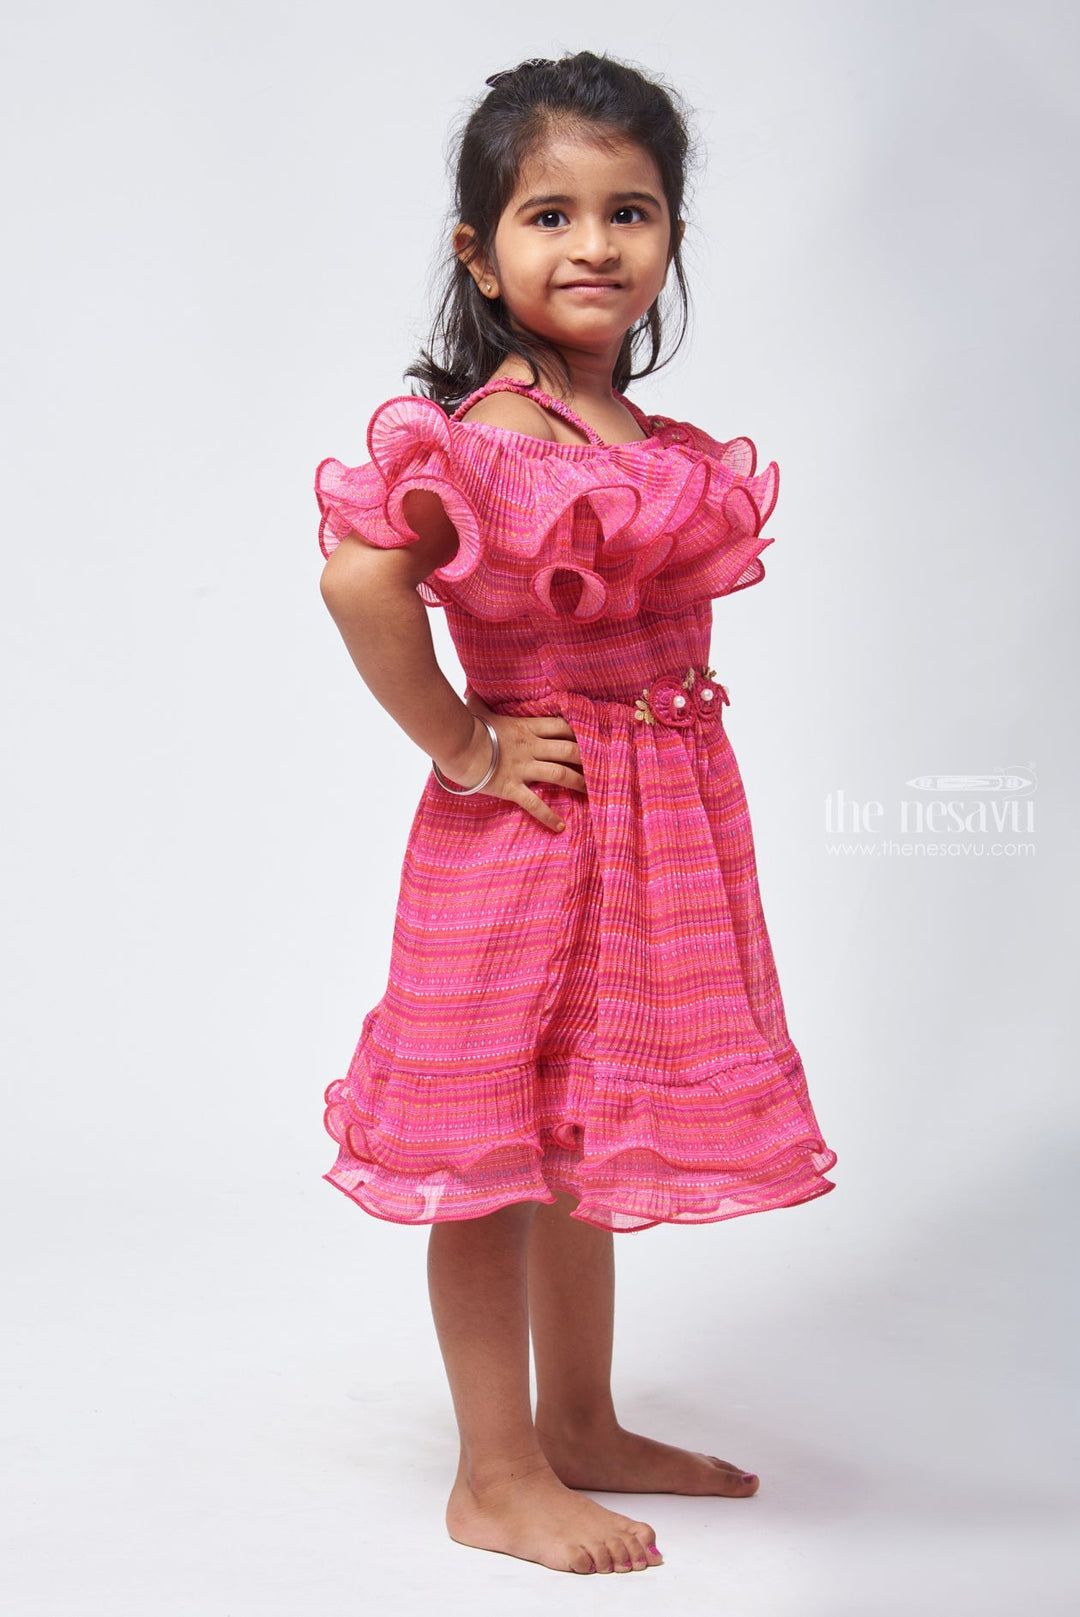 The Nesavu Baby Frock / Jhabla Ruffled Pink Geometric Outfit for Baby Girl Charm Nesavu Bestselling baby frocks for new arrivals | Baby Casual Fancy Frock | The Nesavu